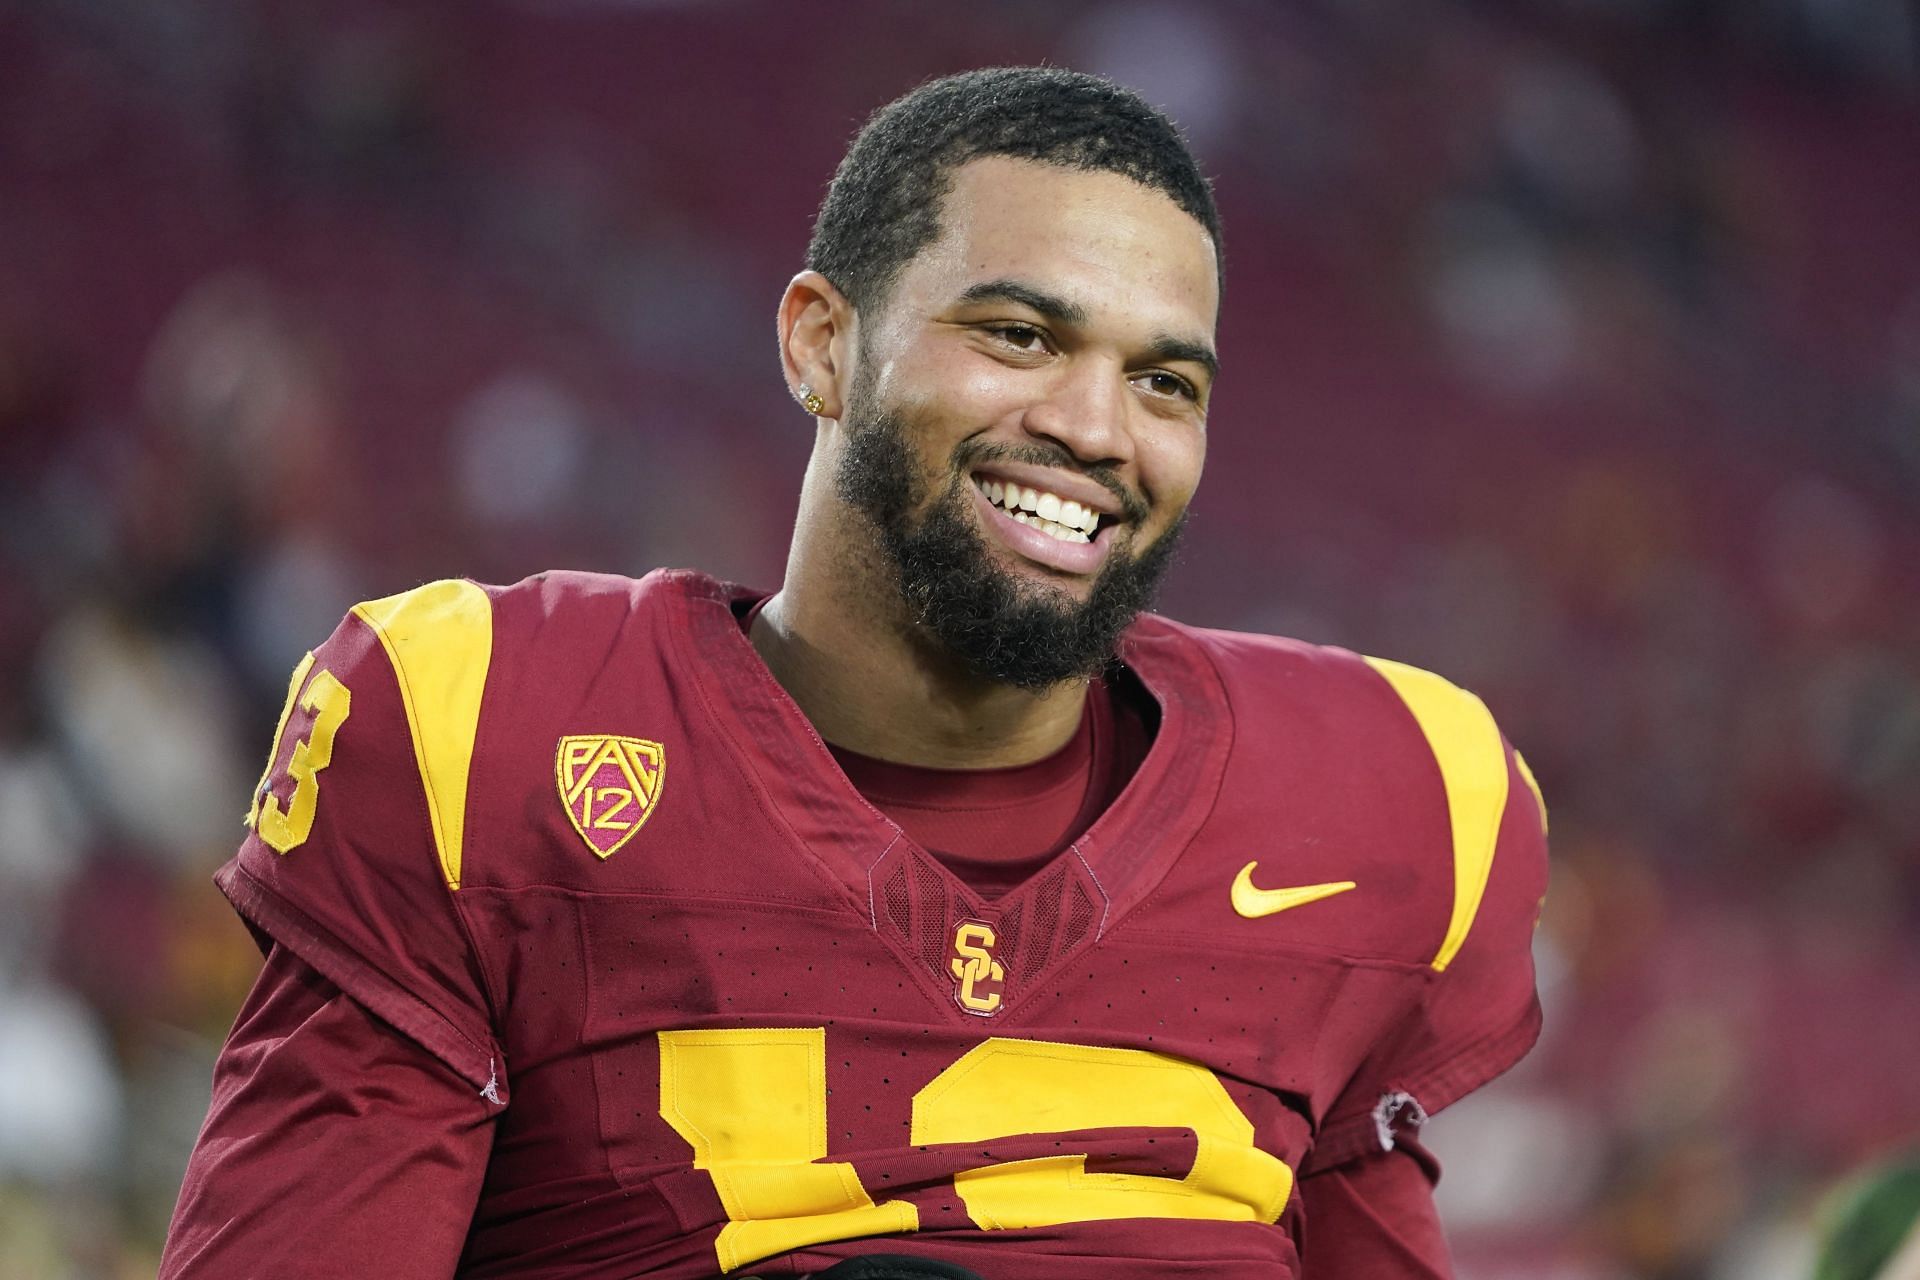 "The system is completely backwards" USC star Caleb Williams might